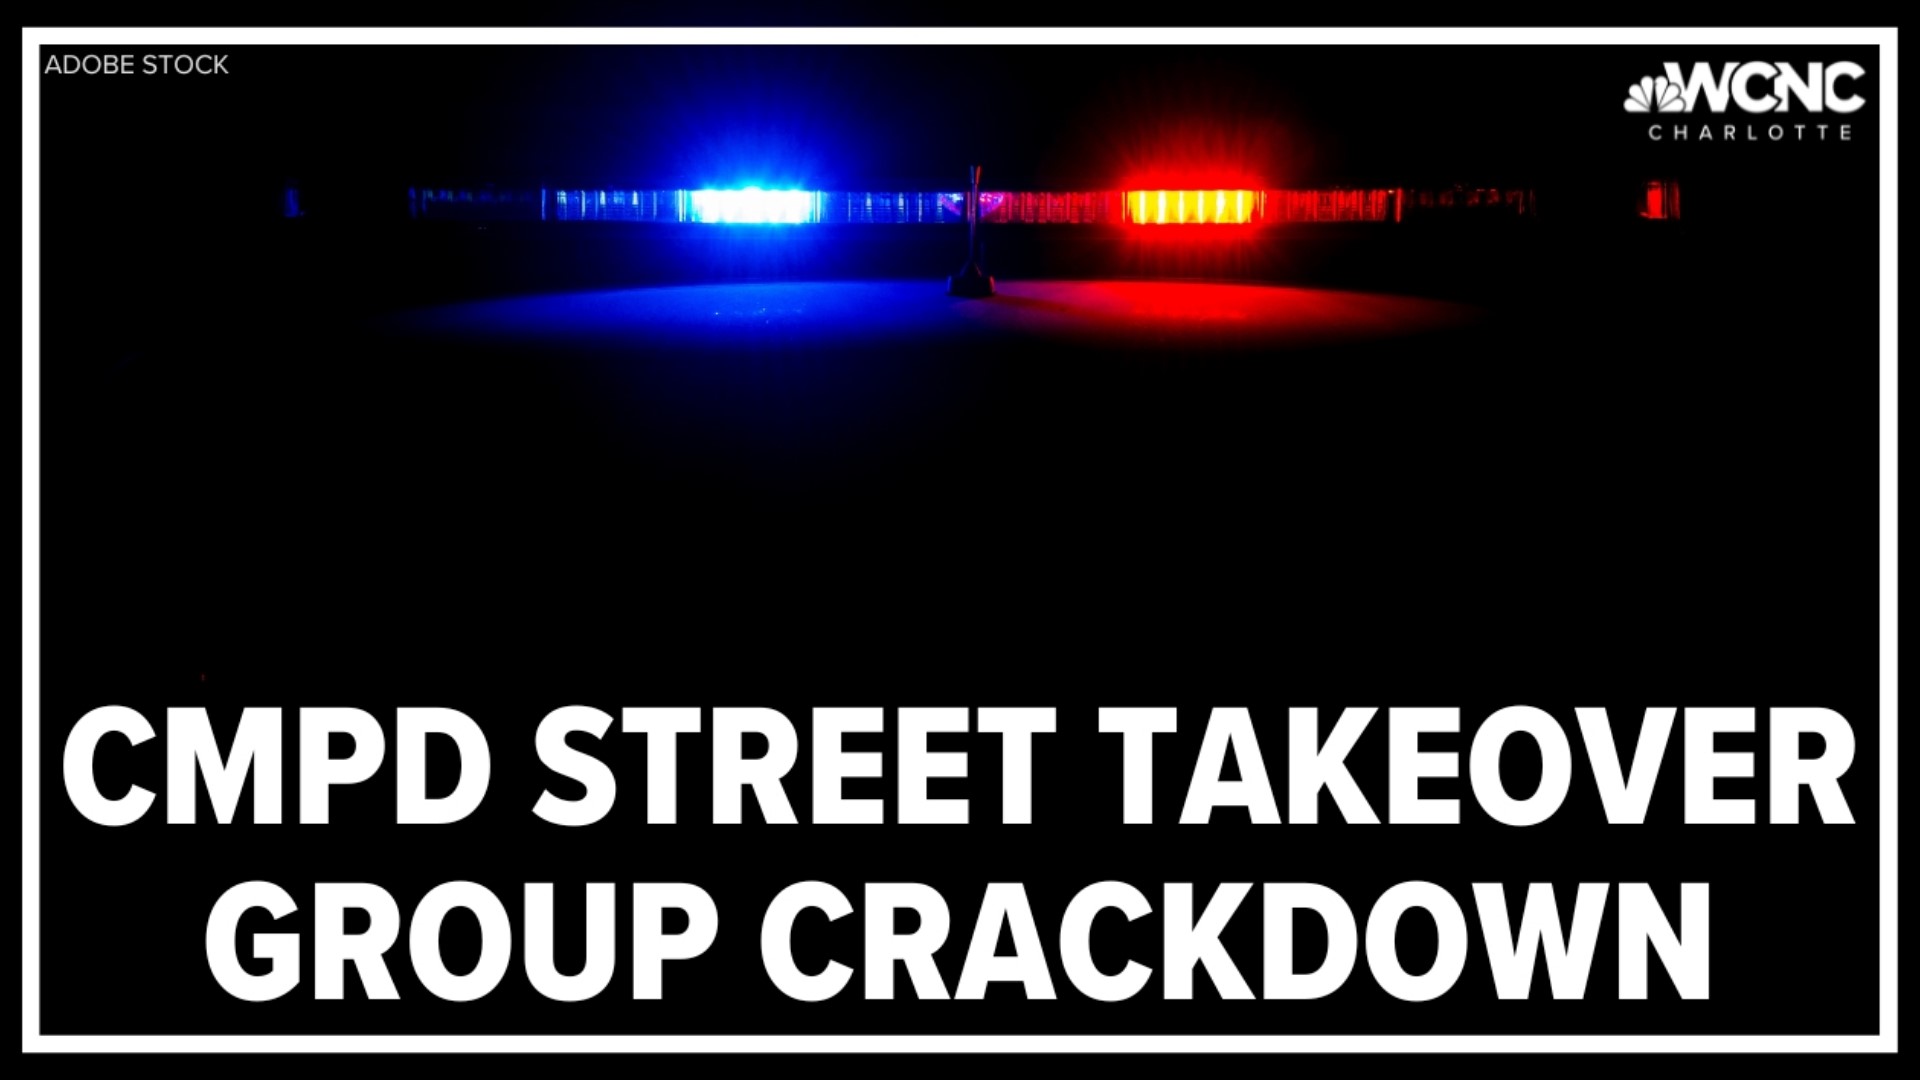 CMPD is cracking down on street takeover groups throughout the city.